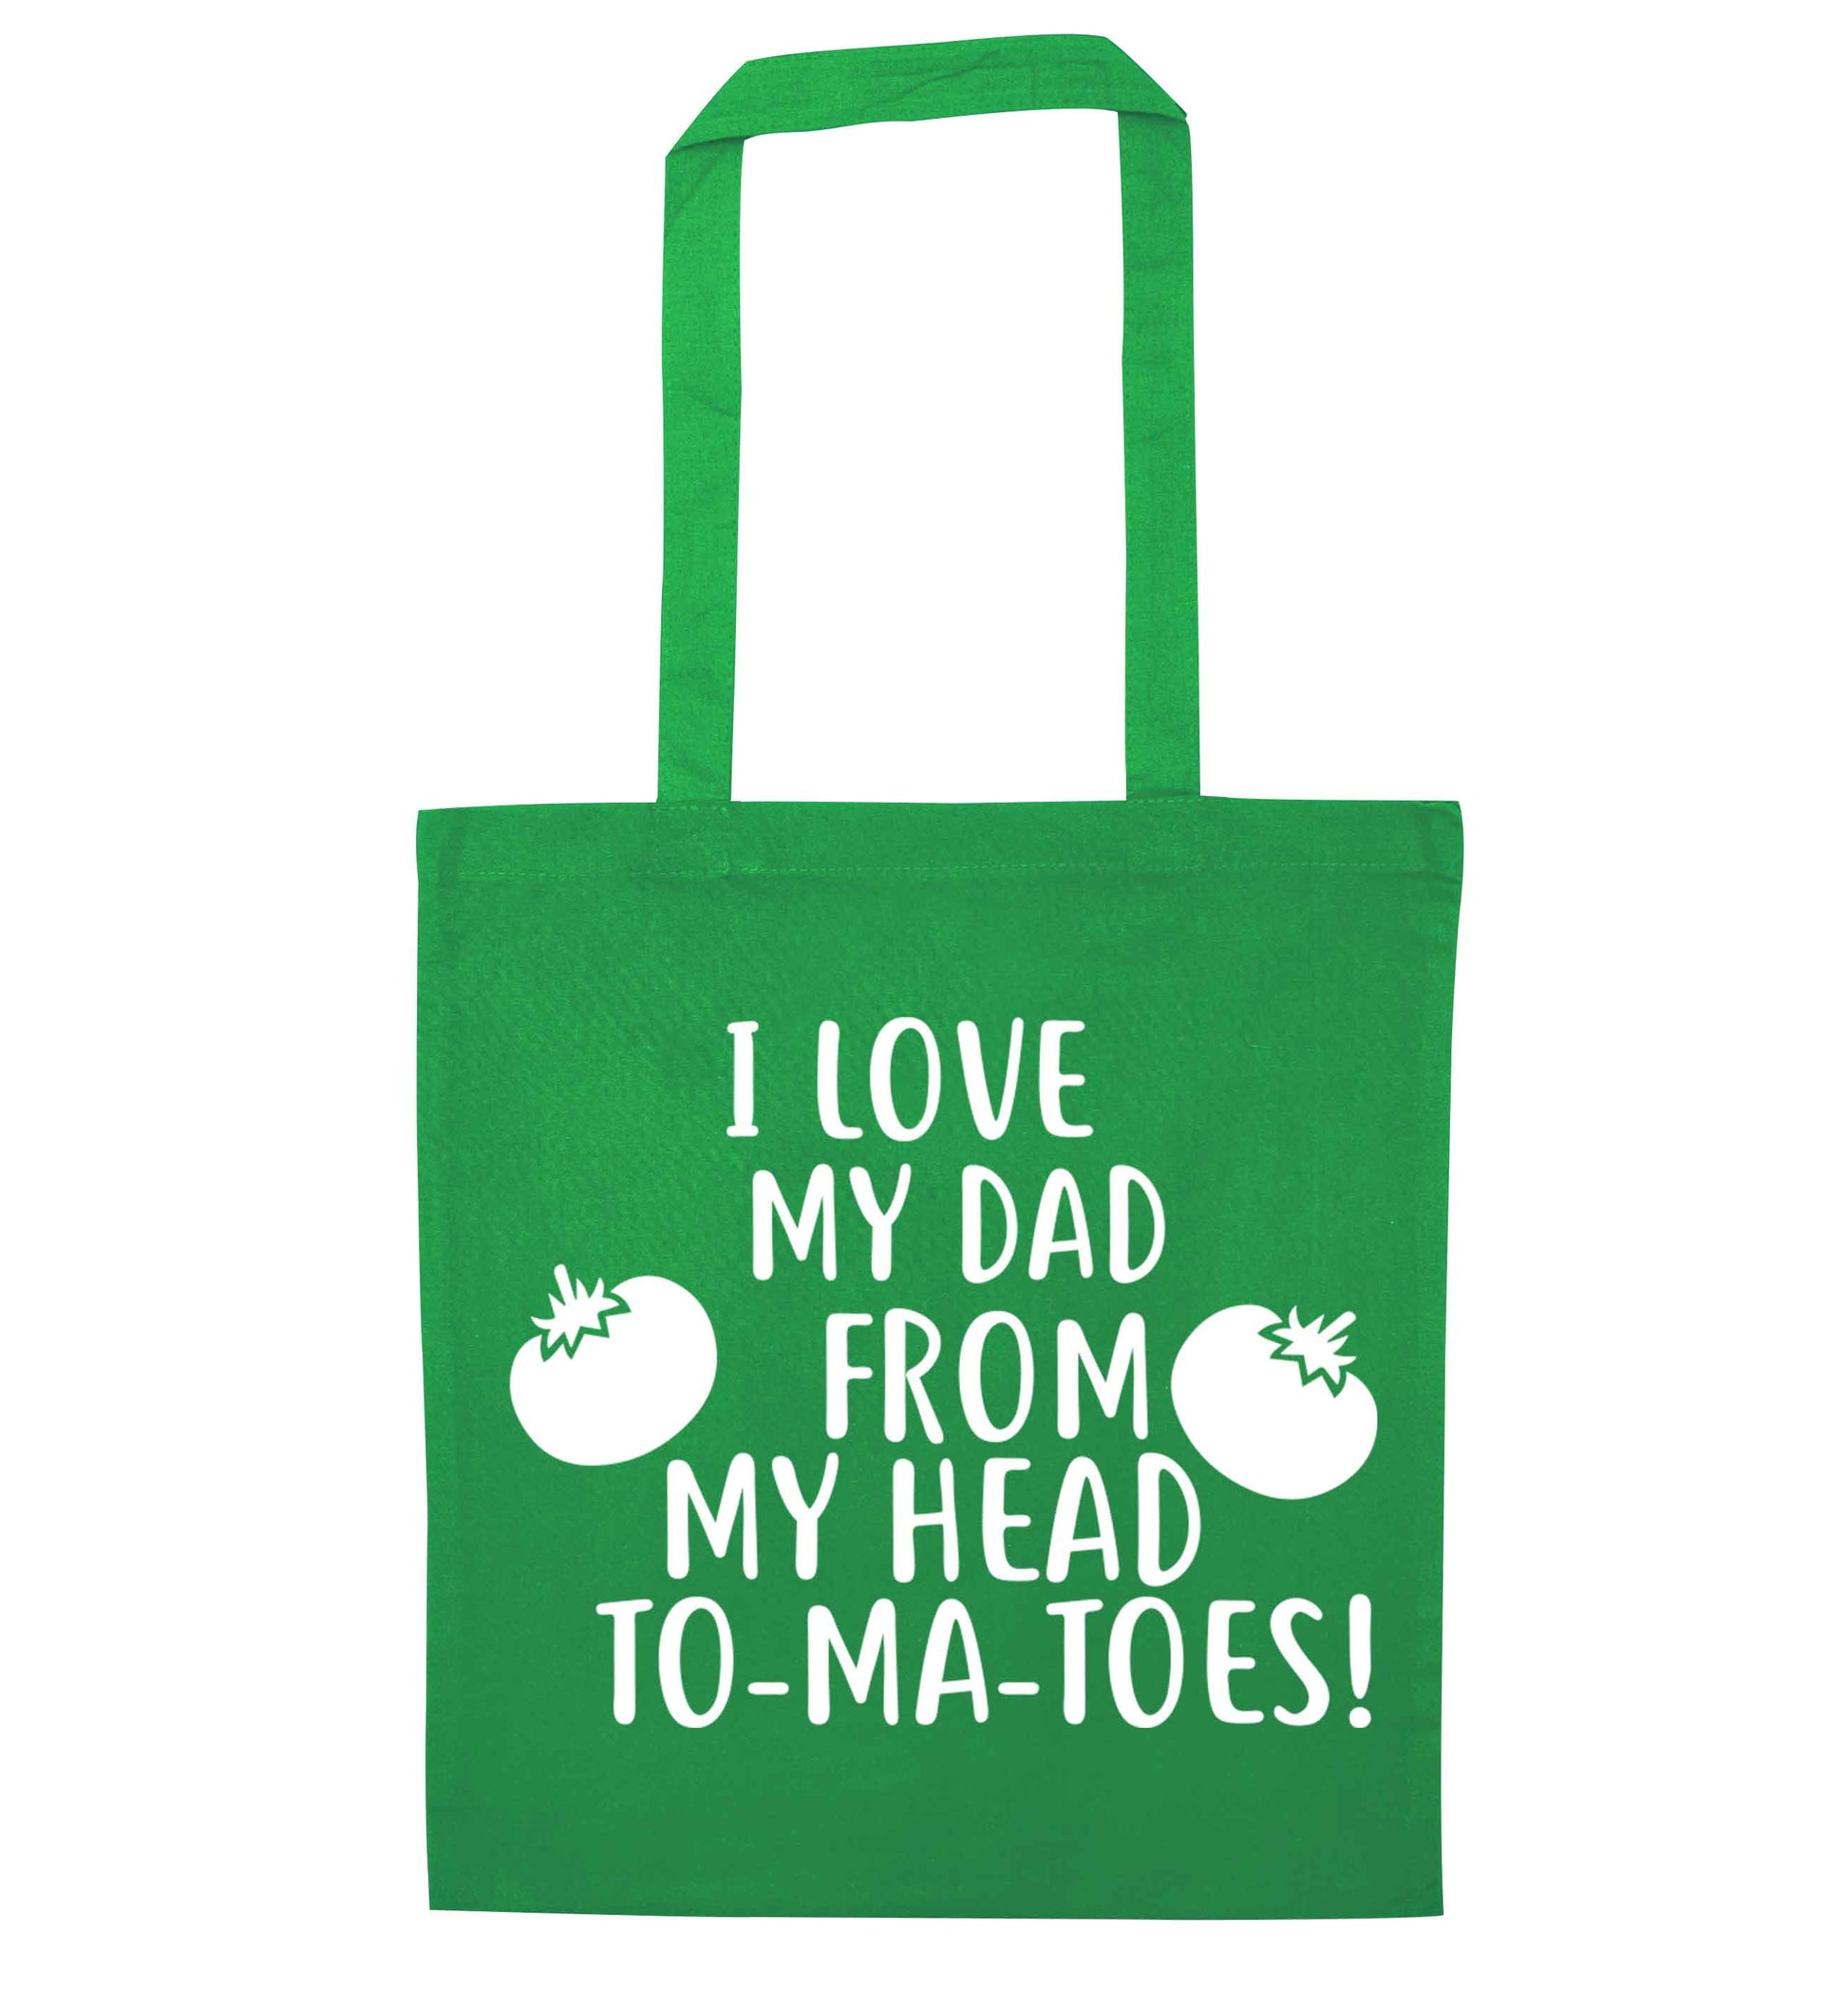 I love my dad from my head to-ma-toes green tote bag